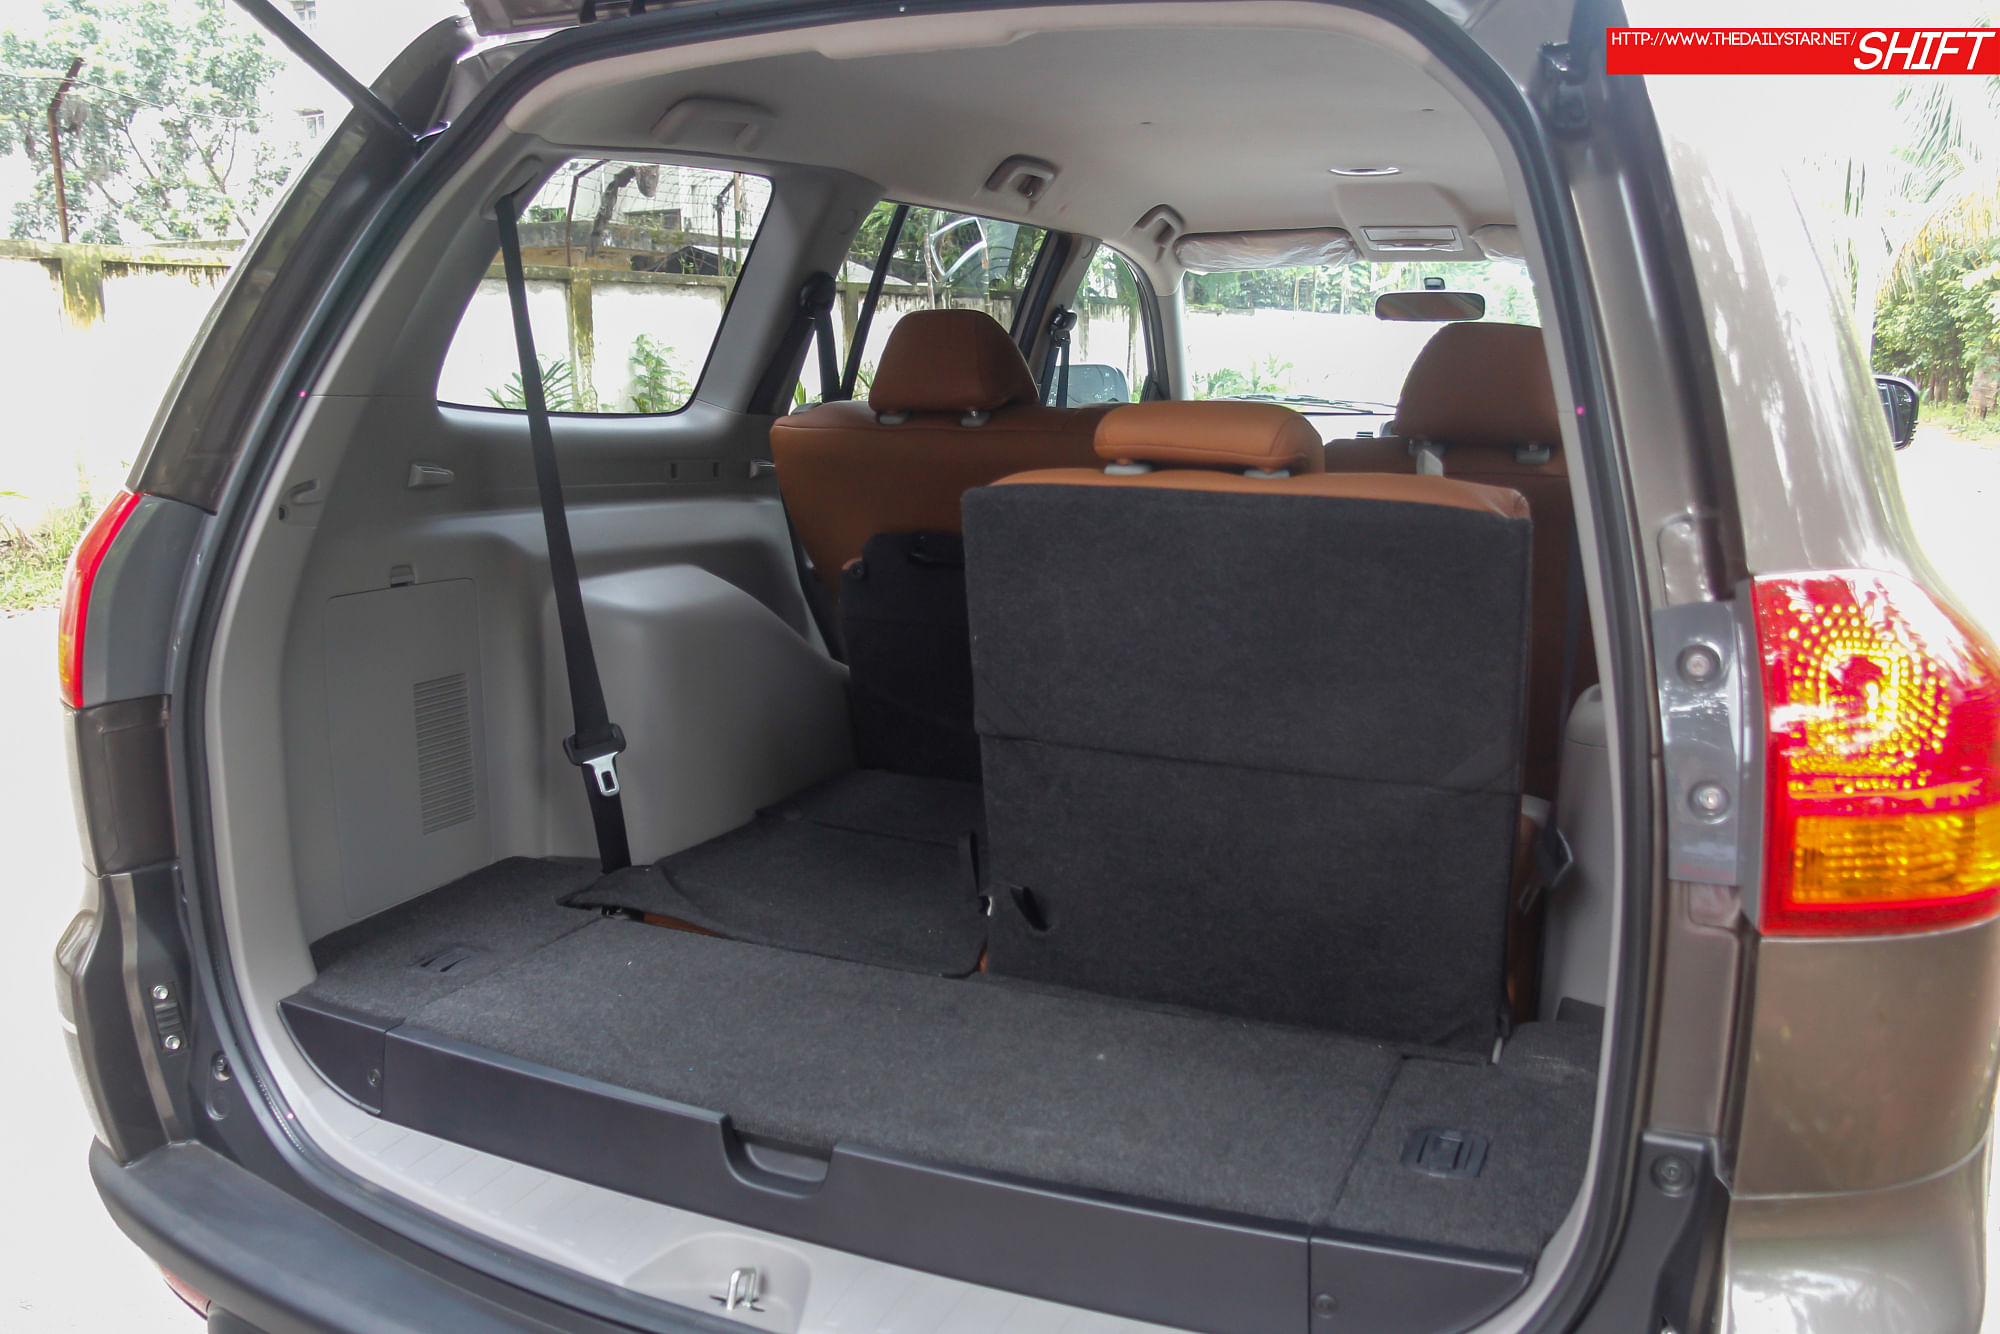 7 seats, rear ones fold down to give massive amount of space for long haul luggage. 